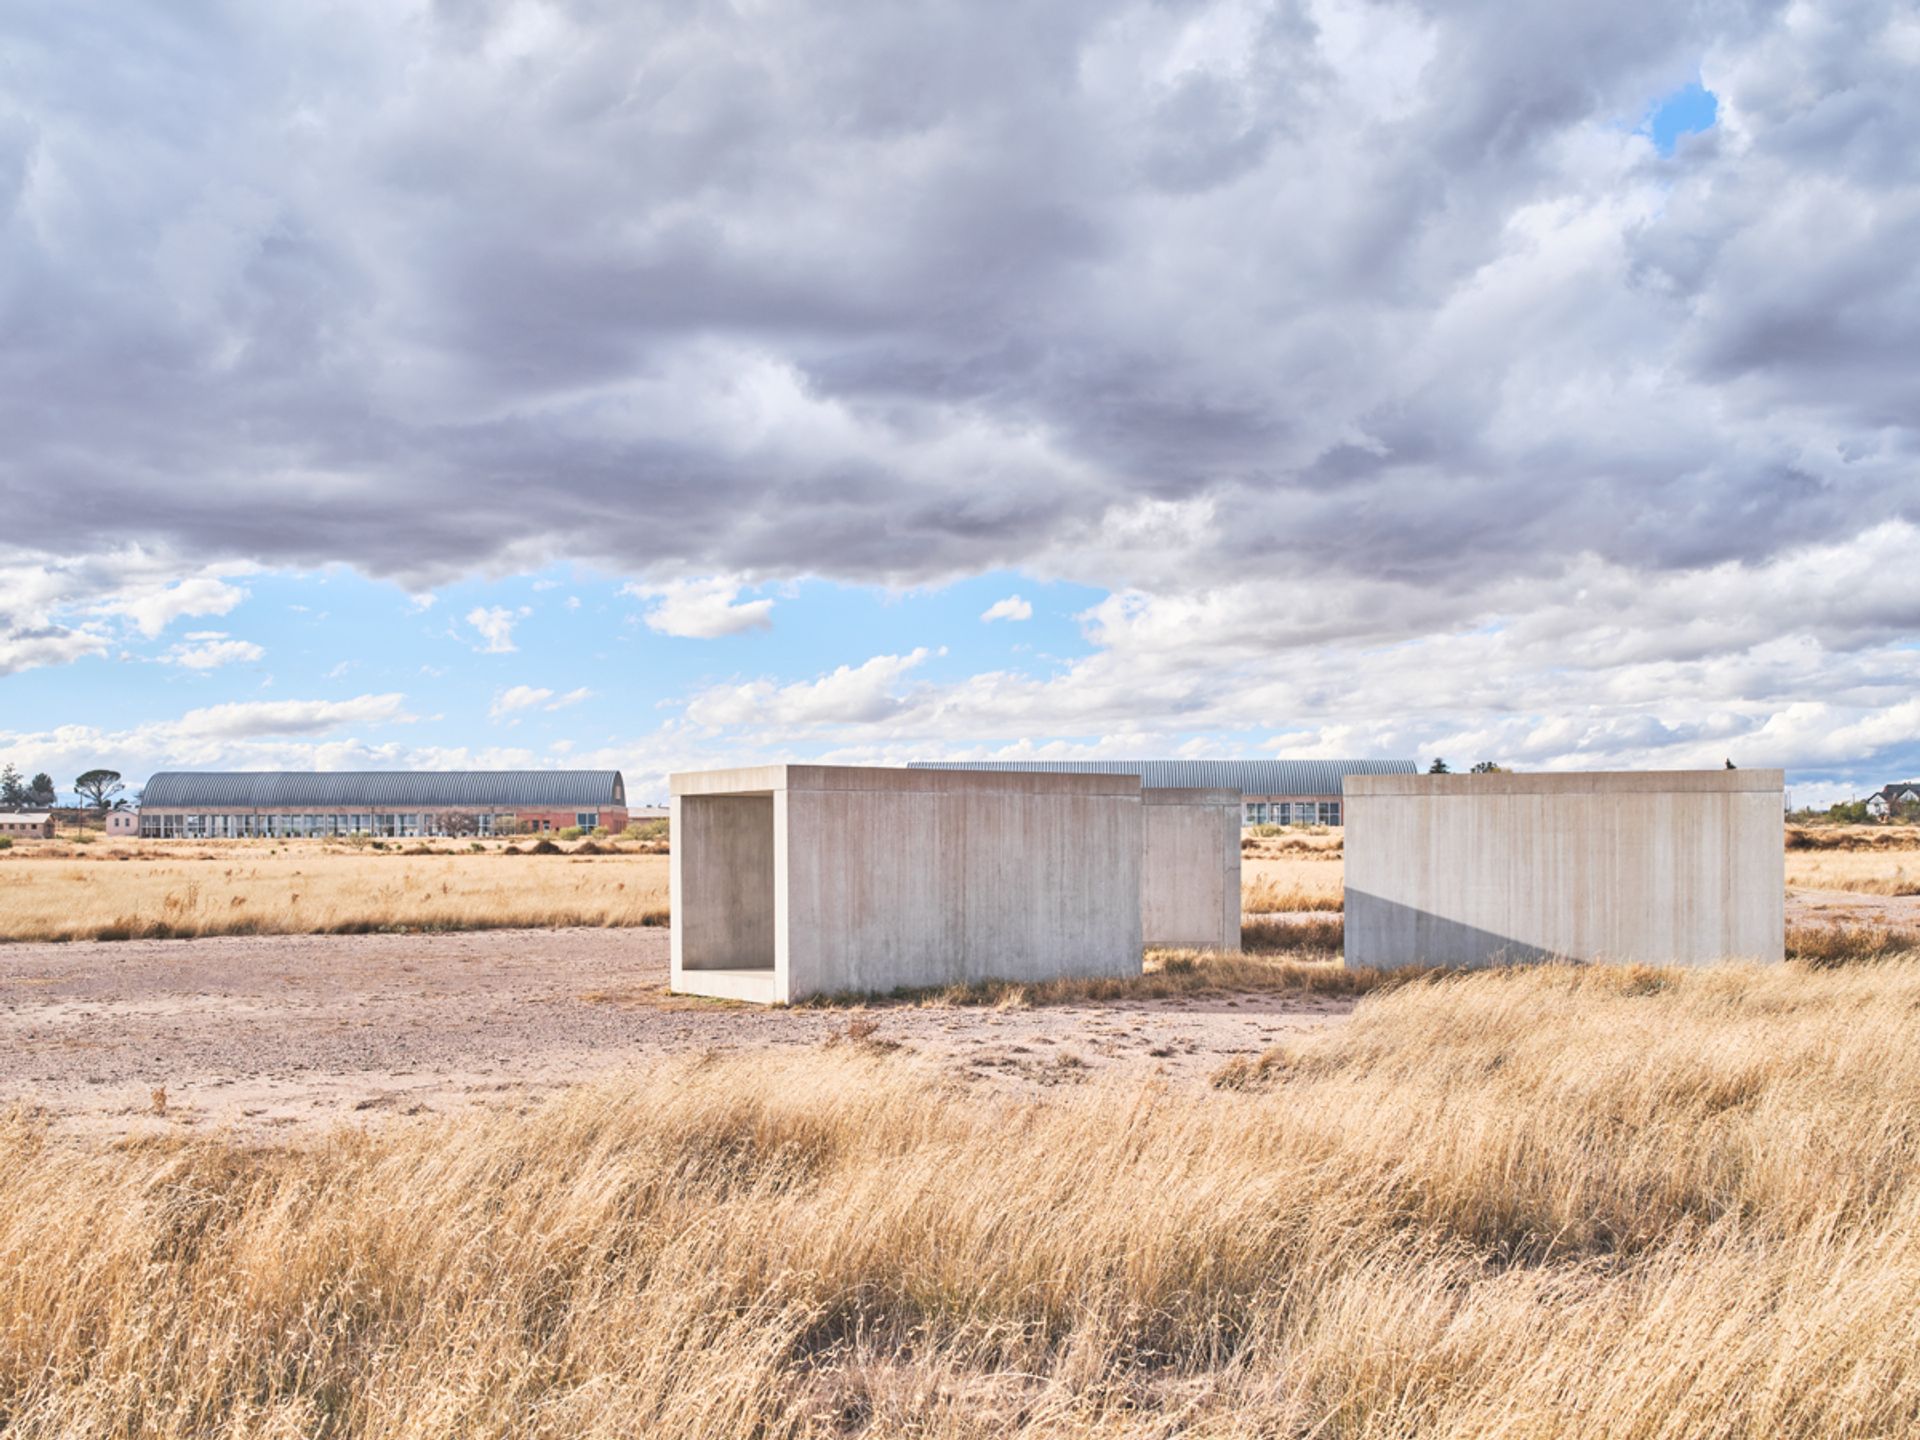 Donald Judd, 15 works in concrete (1980-84) in Marfa, Texas Courtesy The Chinati Foundation. Donald Judd Art © 2021 Judd Foundation / Artists Rights Society (ARS), New York